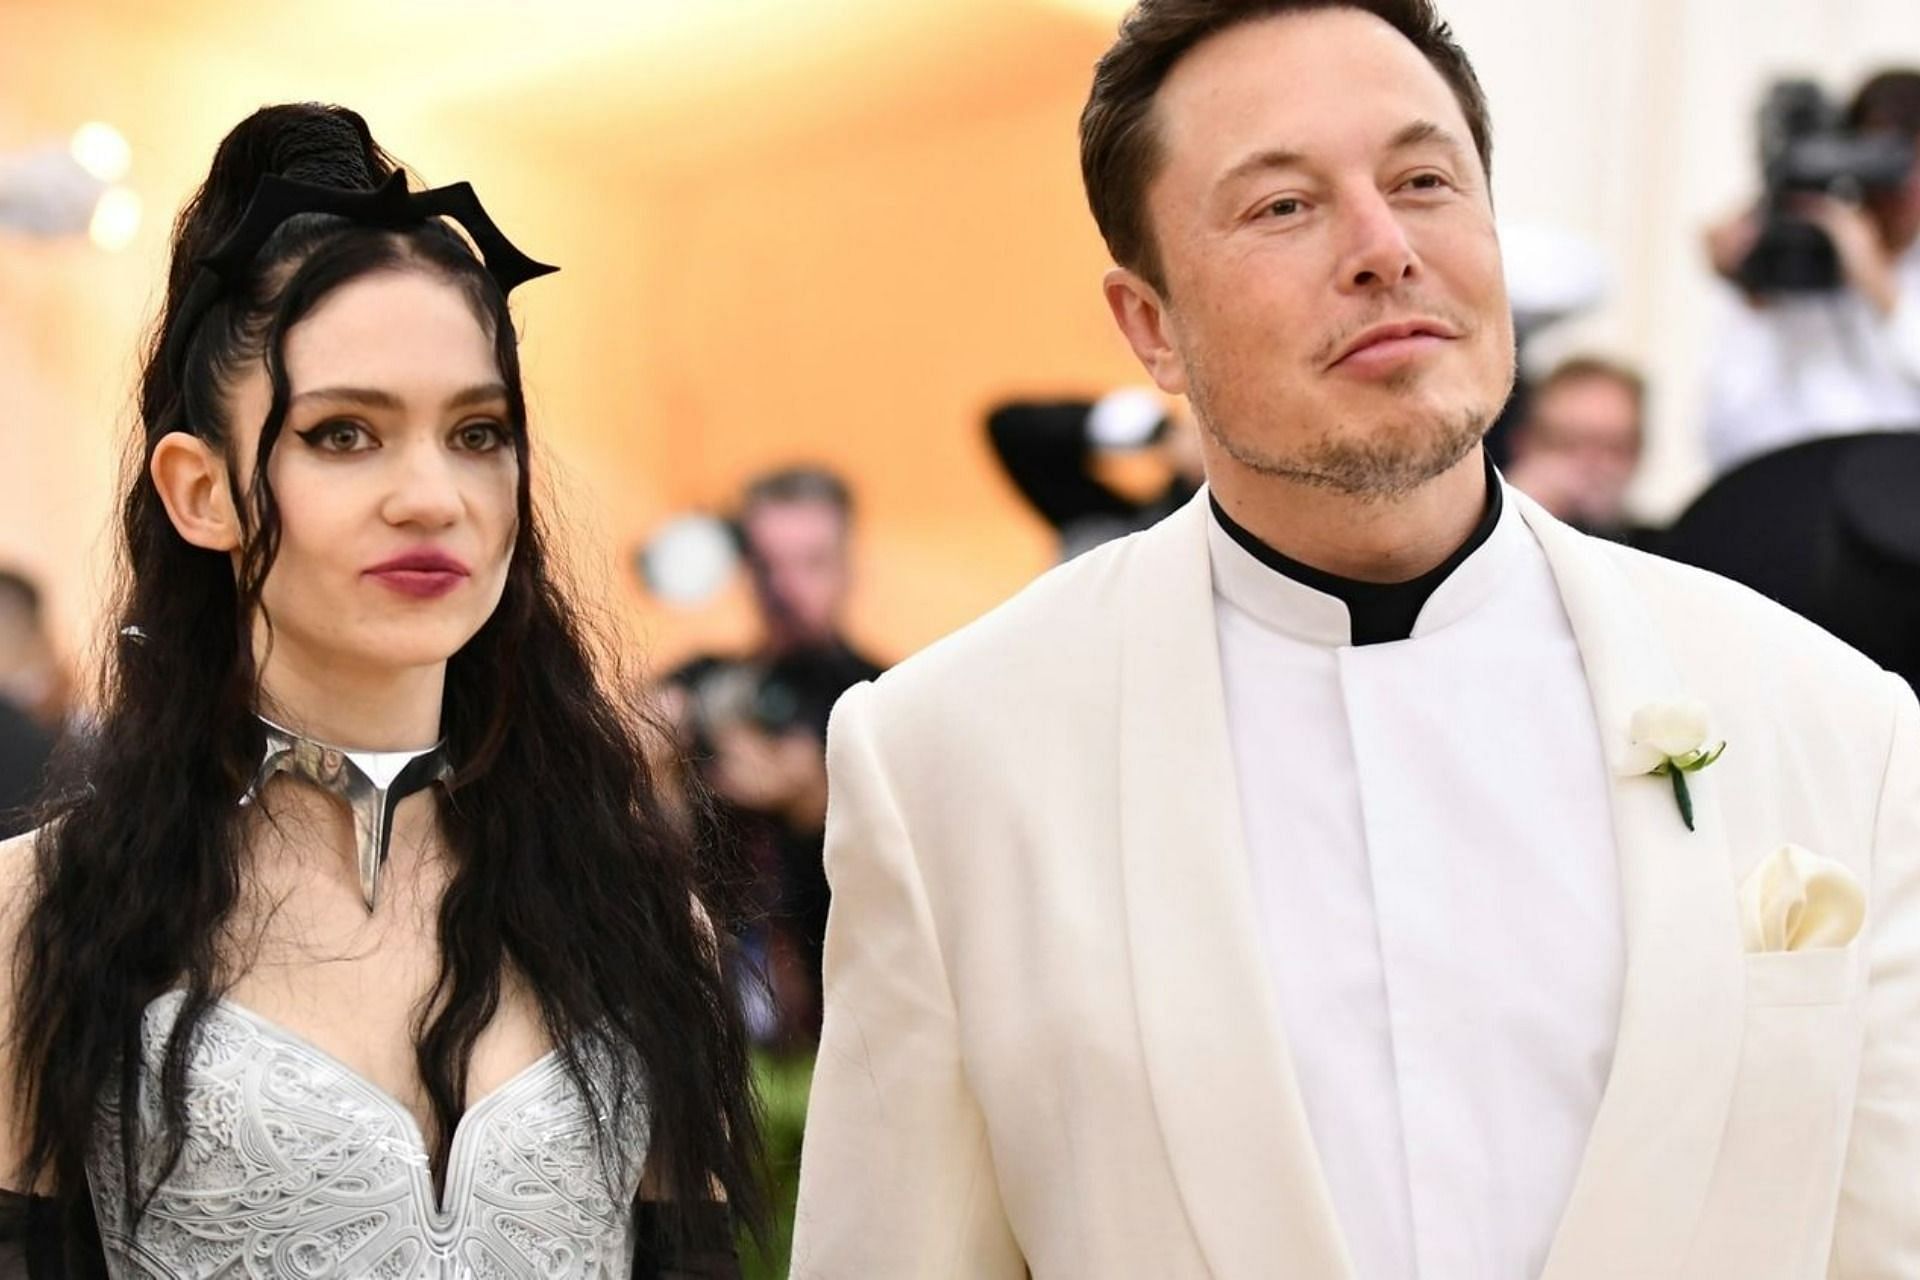 Elon Musk and Grimes welcome second baby through surrogacy (Image via Invision)